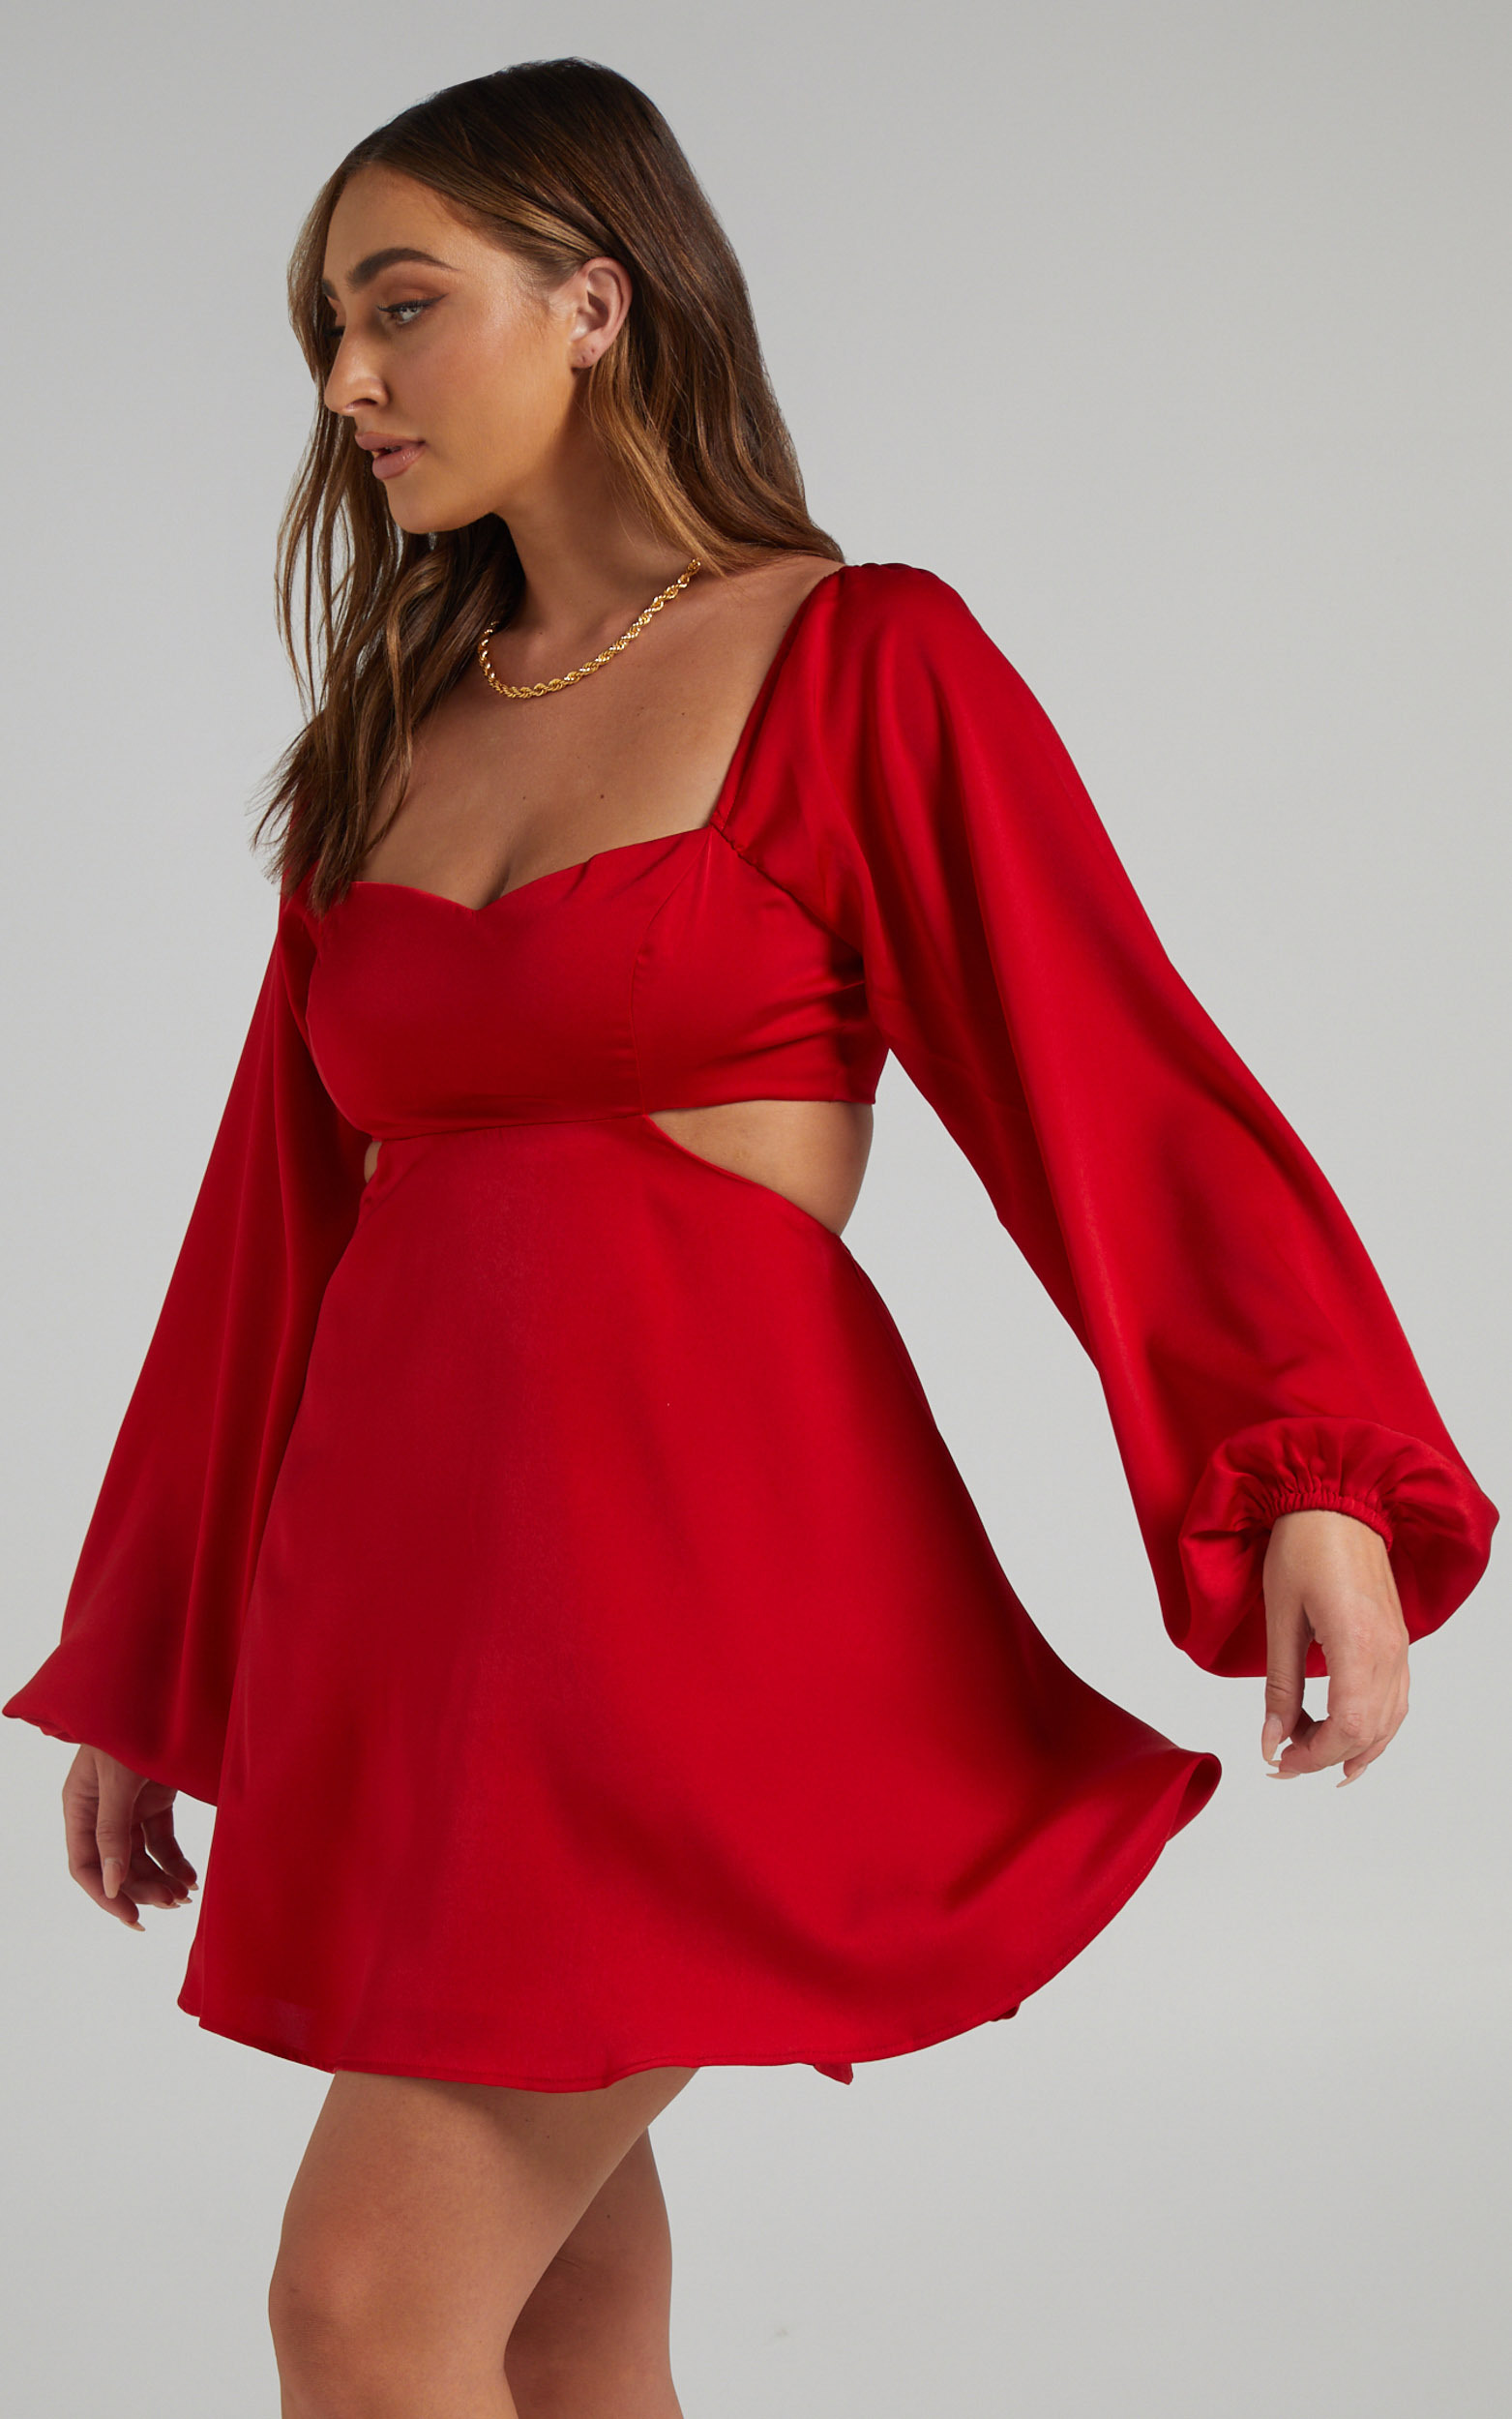 Dolci Side Cut Out Long Sleeve Mini Dress in Red - 06, RED4, hi-res image number null